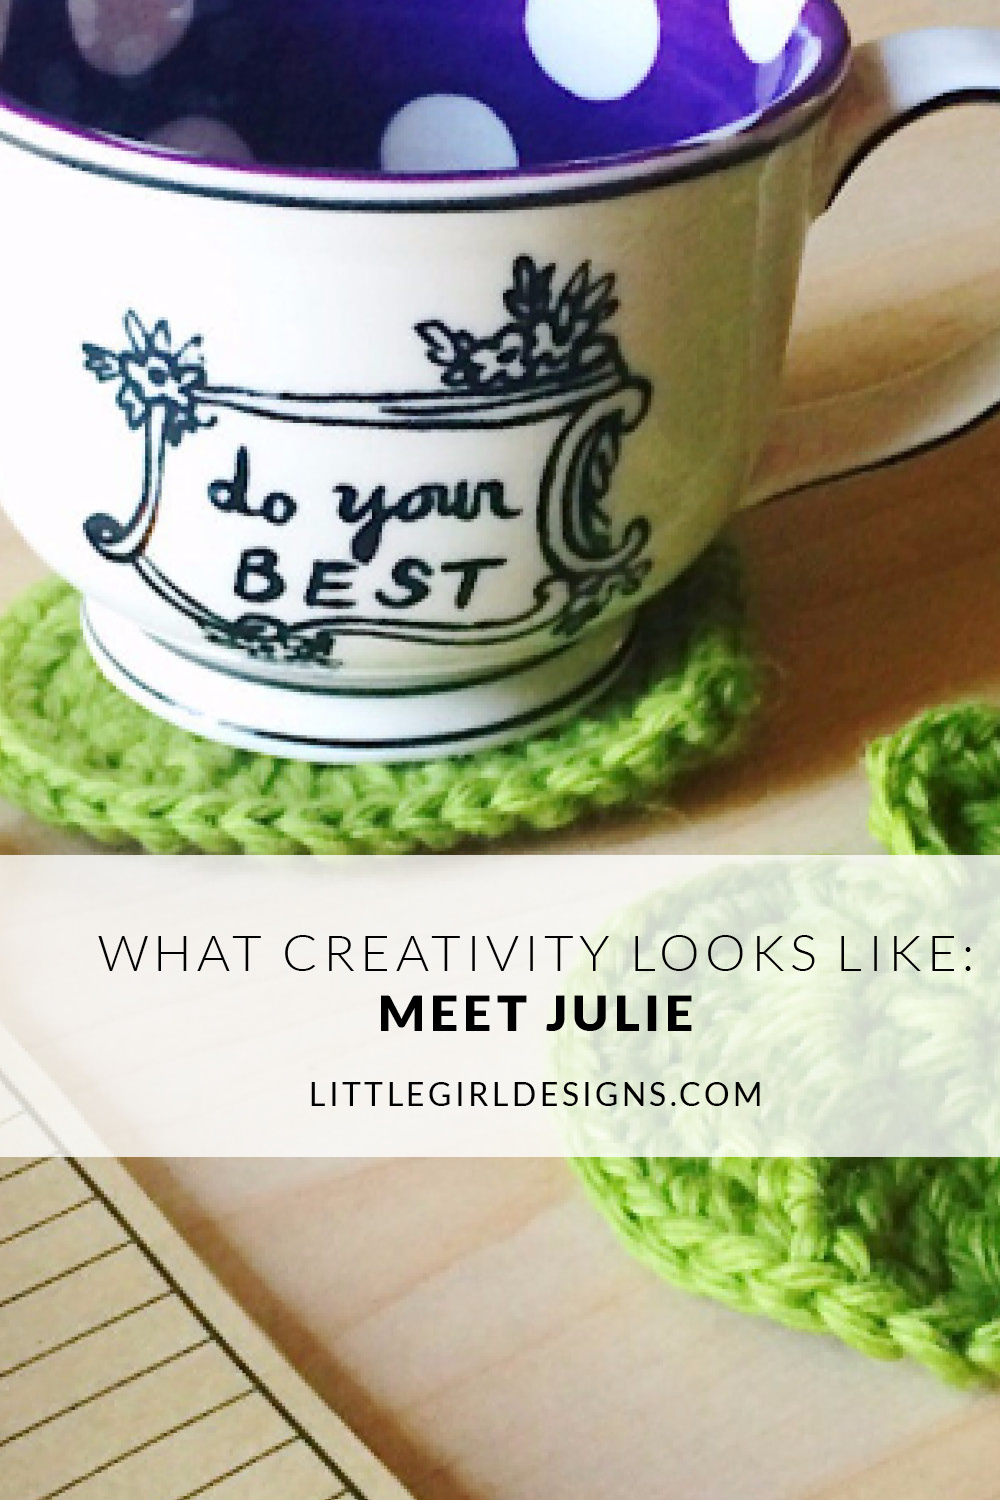 Meet Julie from Tokyo Blossom Boutique this week in the What Creativity Looks Like series! Learn about the inspiration behind her creations and what keeps her going as a mompreneur. via littlegirldesigns.com